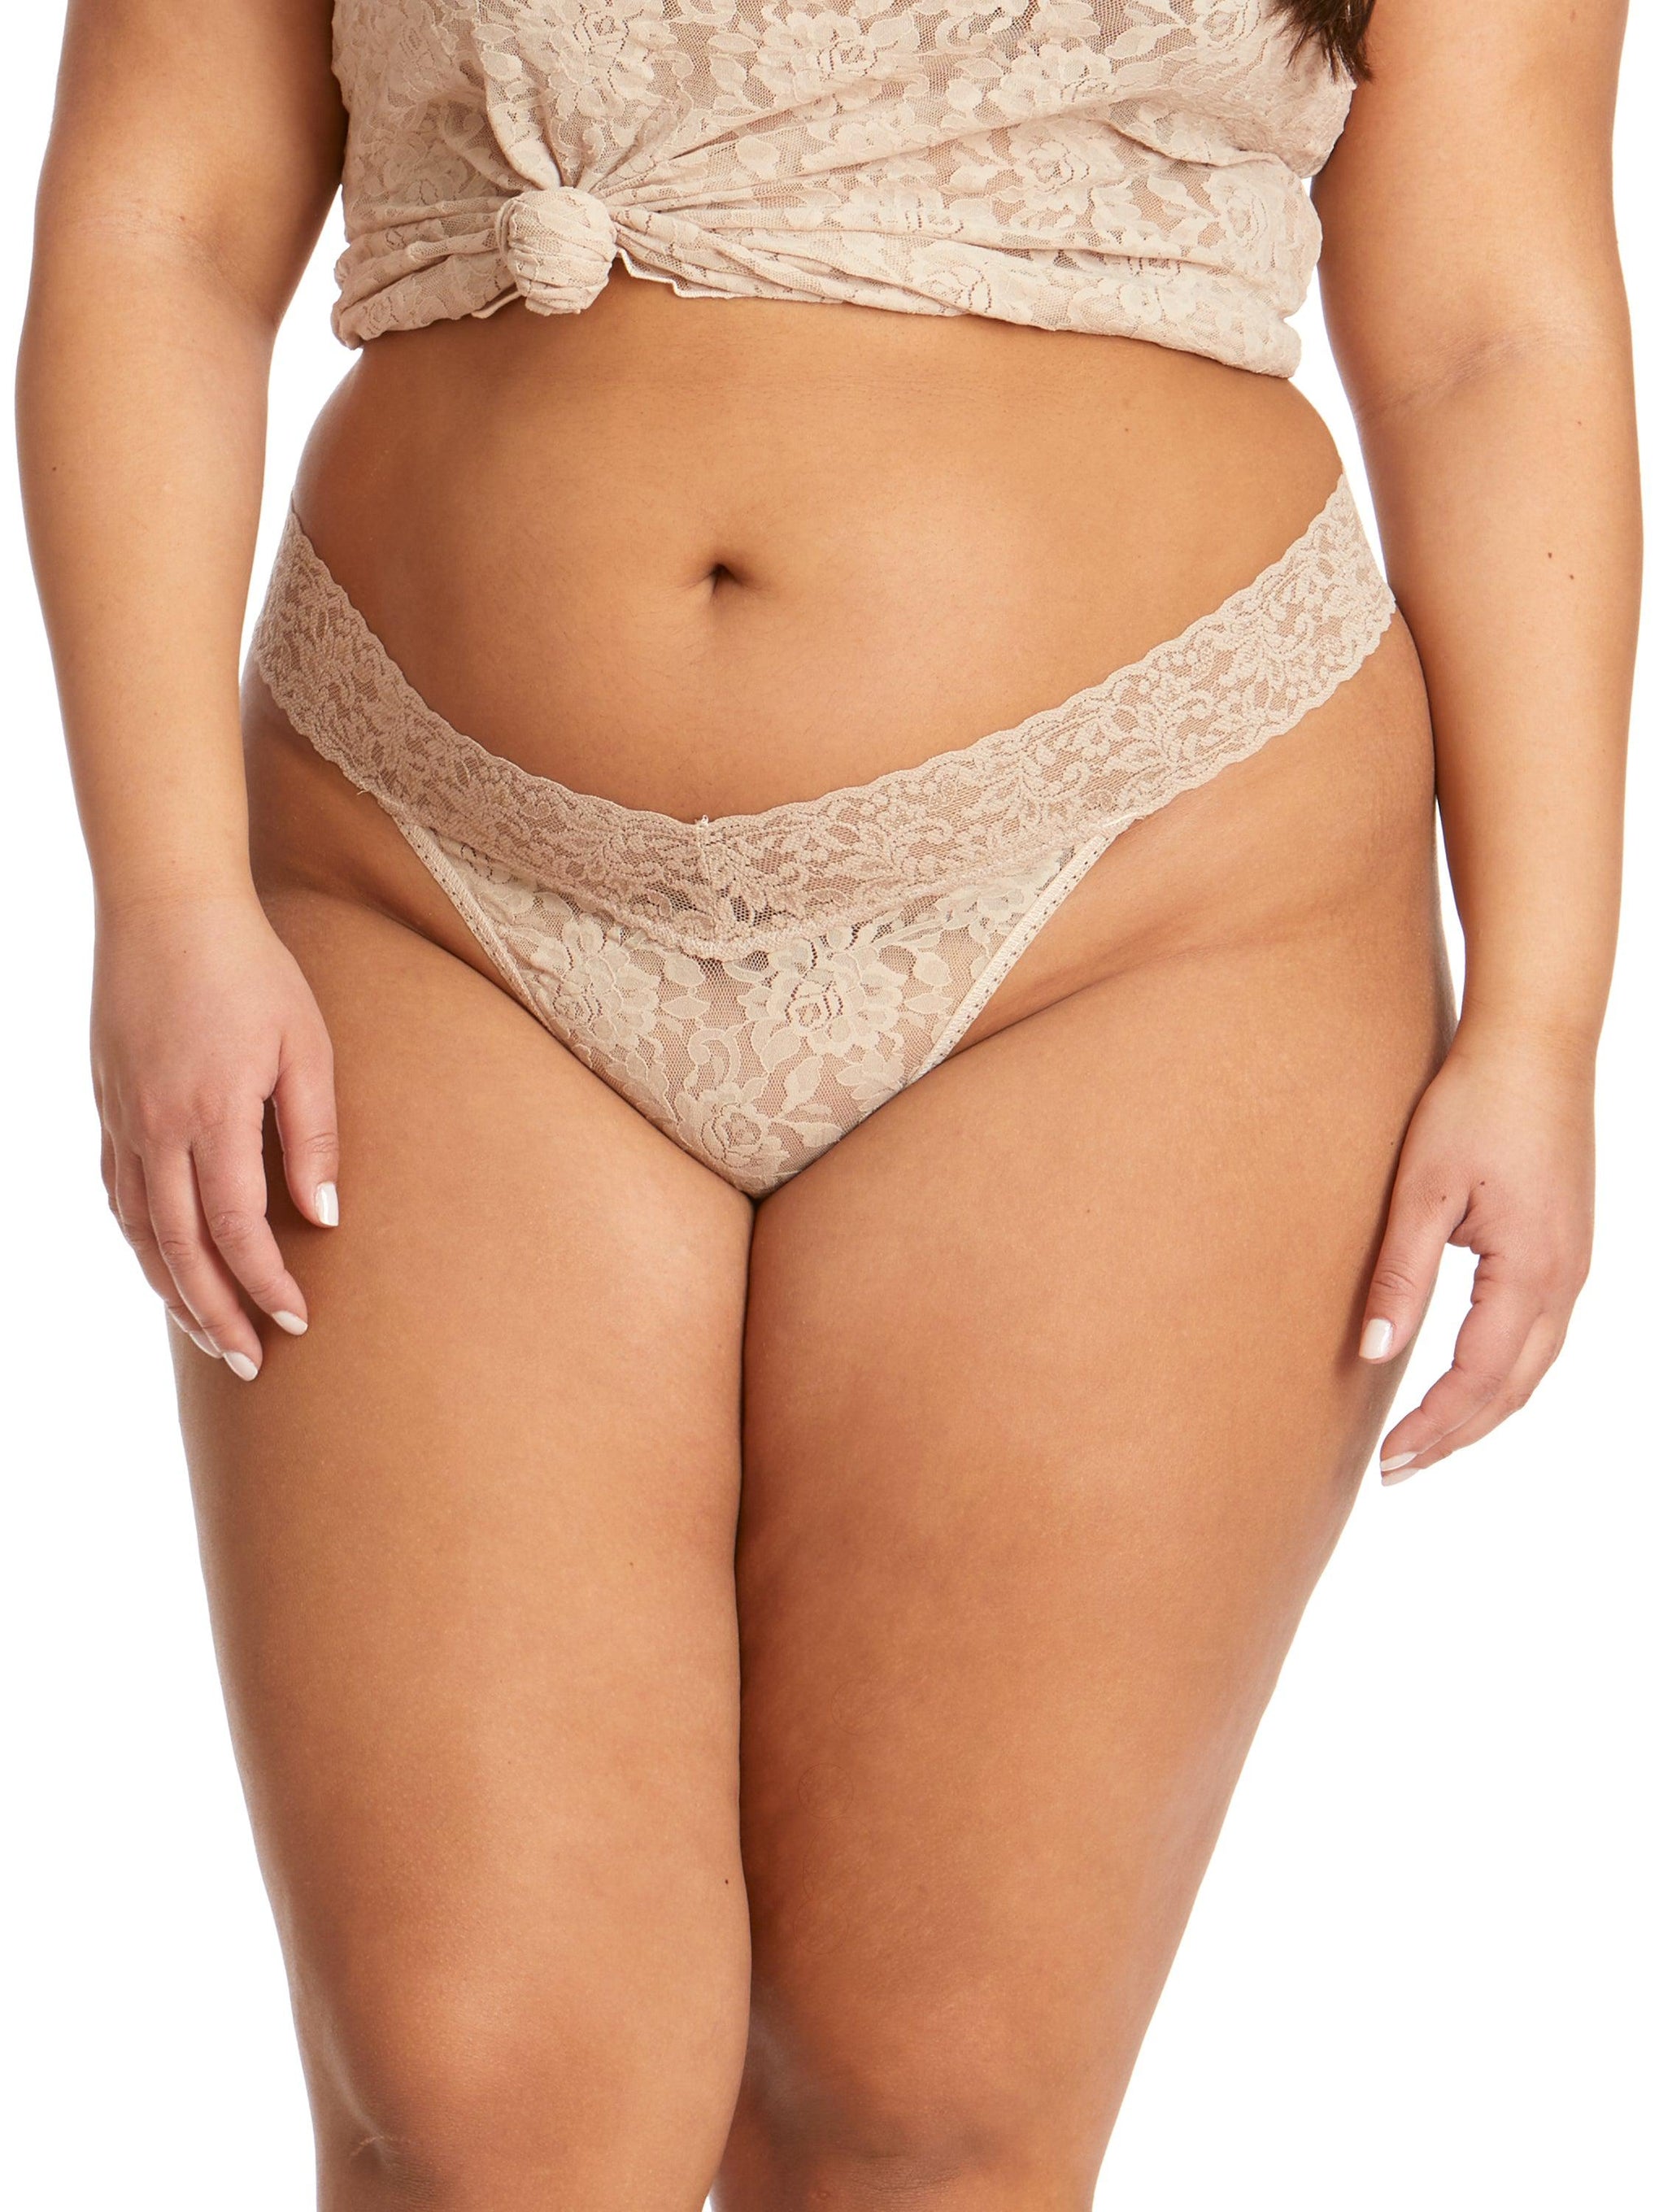 Personalized Plus Size Nude Thong With Lace Mrs. Thong Underwear With  Wedding Date FAST SHIPPING Sizes X, XL, 2XL, 3XL and 4XL 